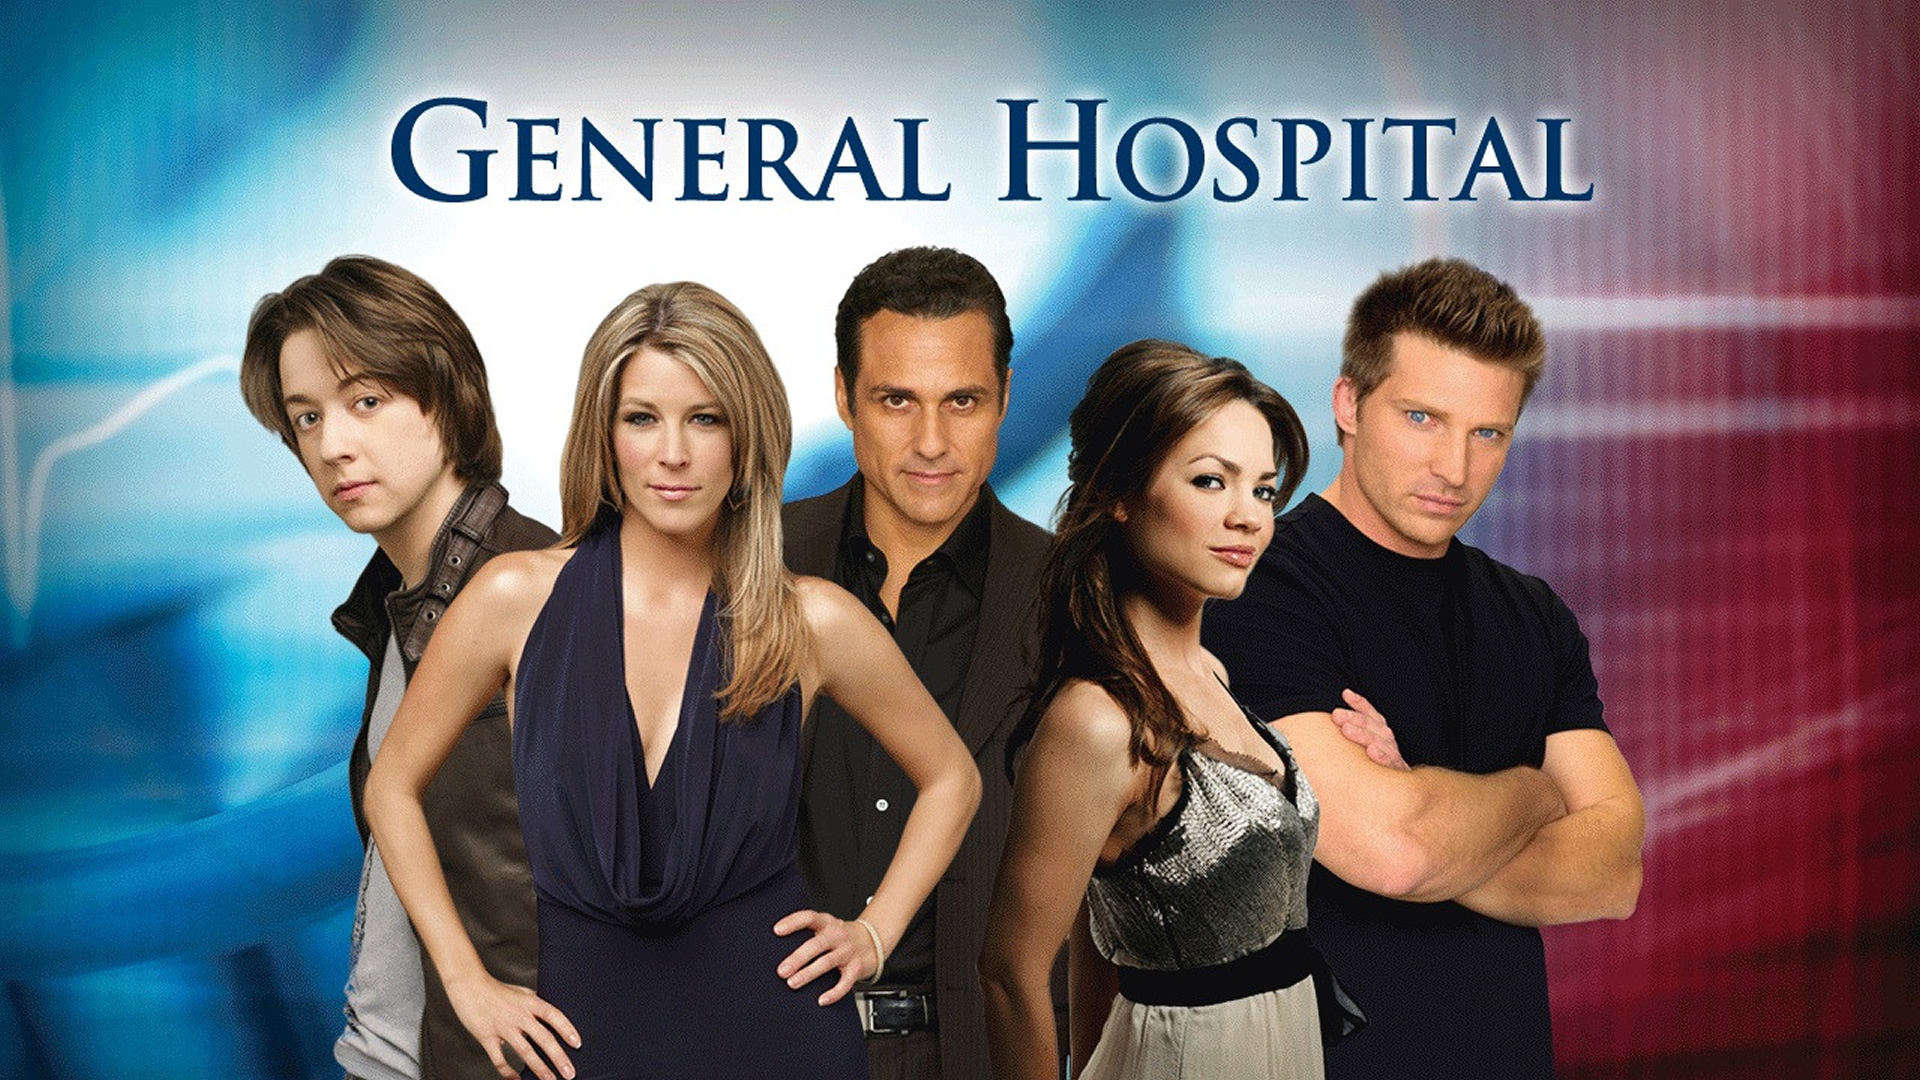 General Hospital Jason Turns To Britt After Breakup Will She Take Him Back? GH Spoilers